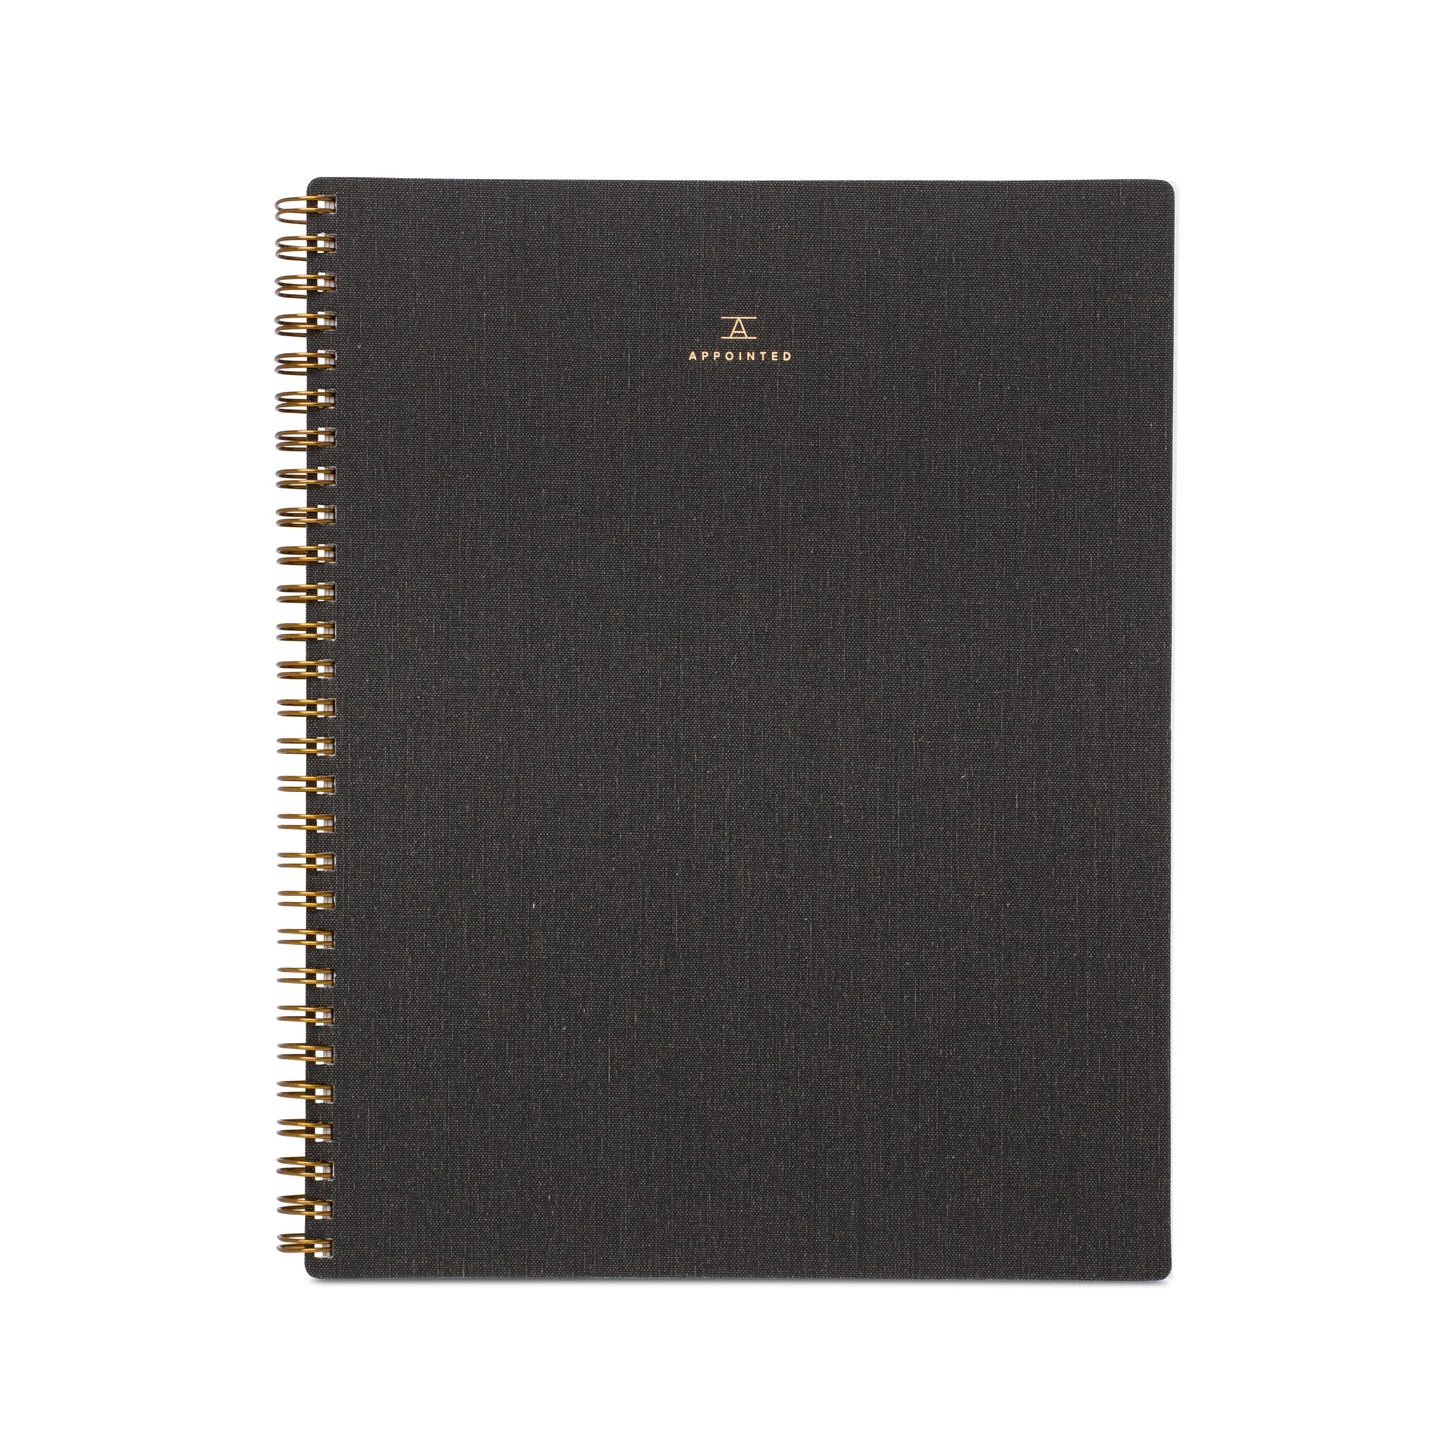 CHARCOAL GREY GRID NOTEBOOKS